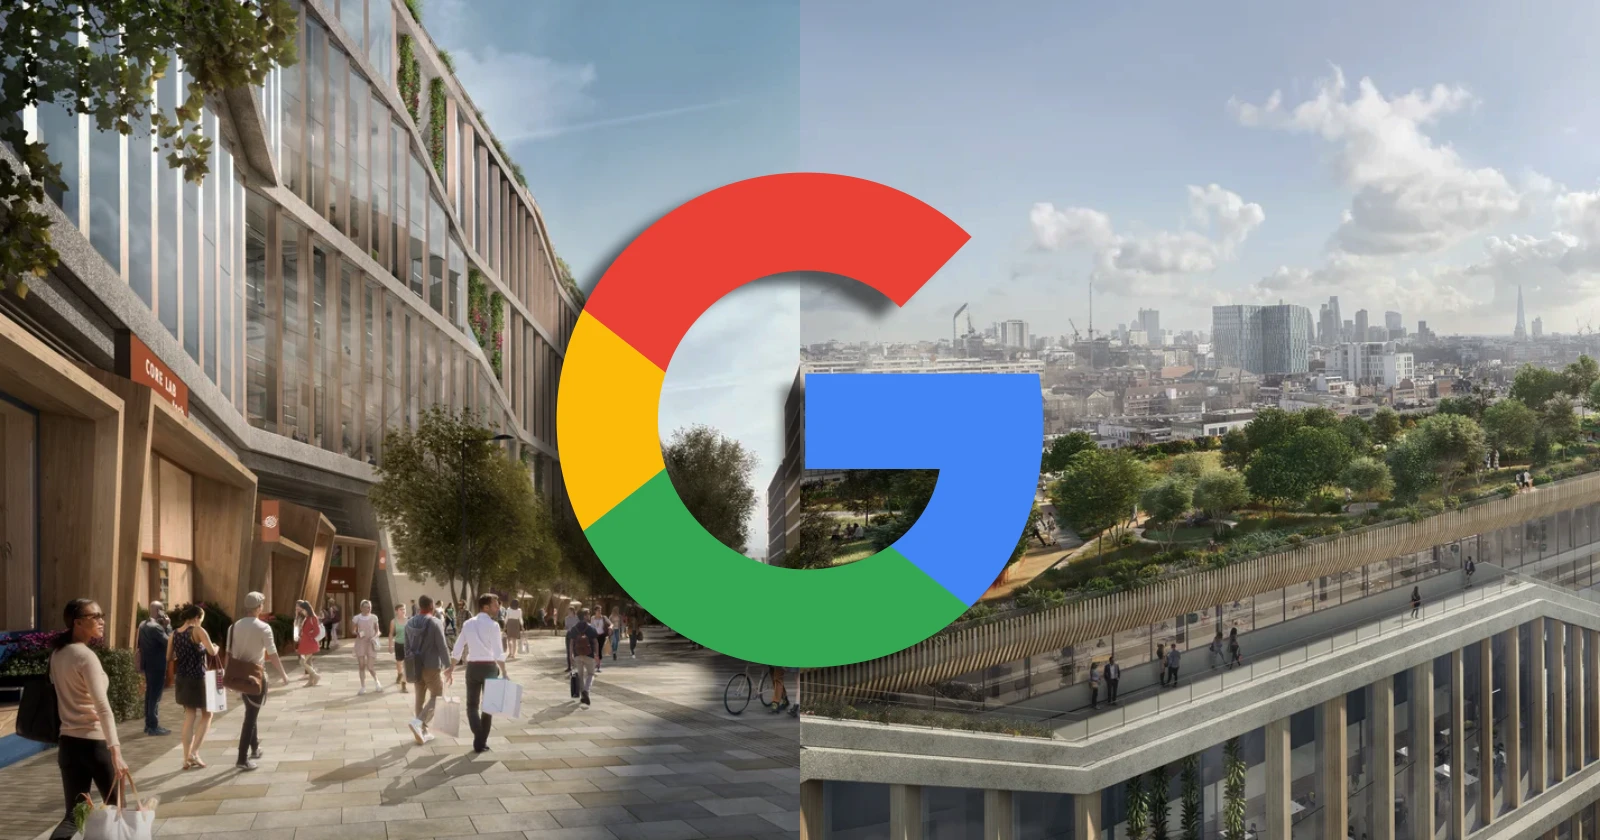 Lucky Pixel Superfans will reportedly be invited to tour Google's King's Cross location